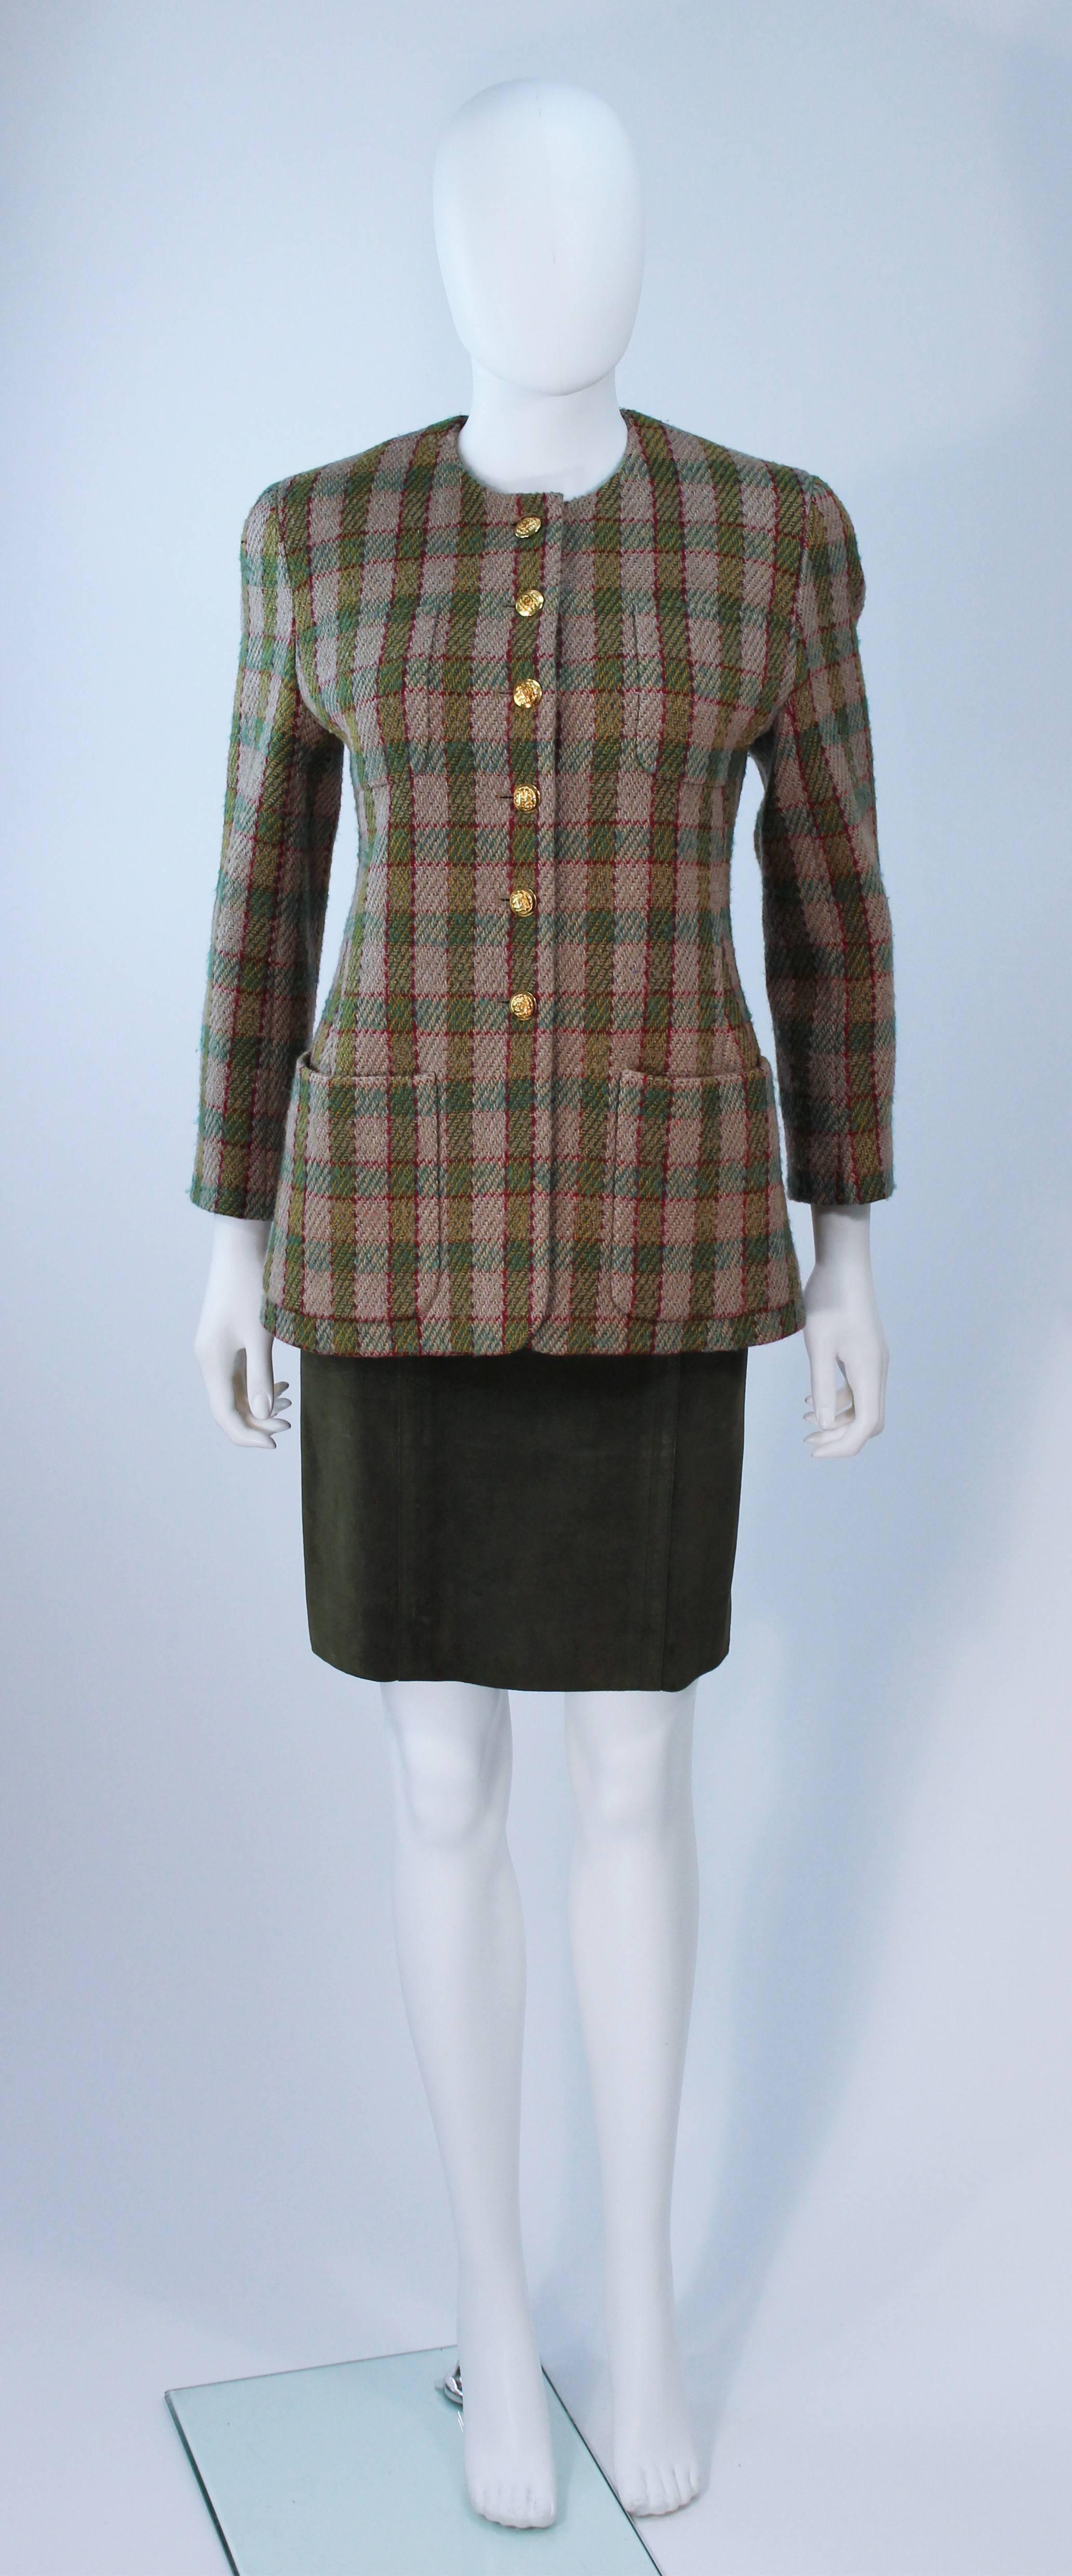  This Chanel skirt suit is composed of wool in khaki, burgundy, and green with an olive suede skirt. The jacket is has center front gold logo button closures. The pencil style skirt features a zipper closure with hook and eye. In excellent vintage